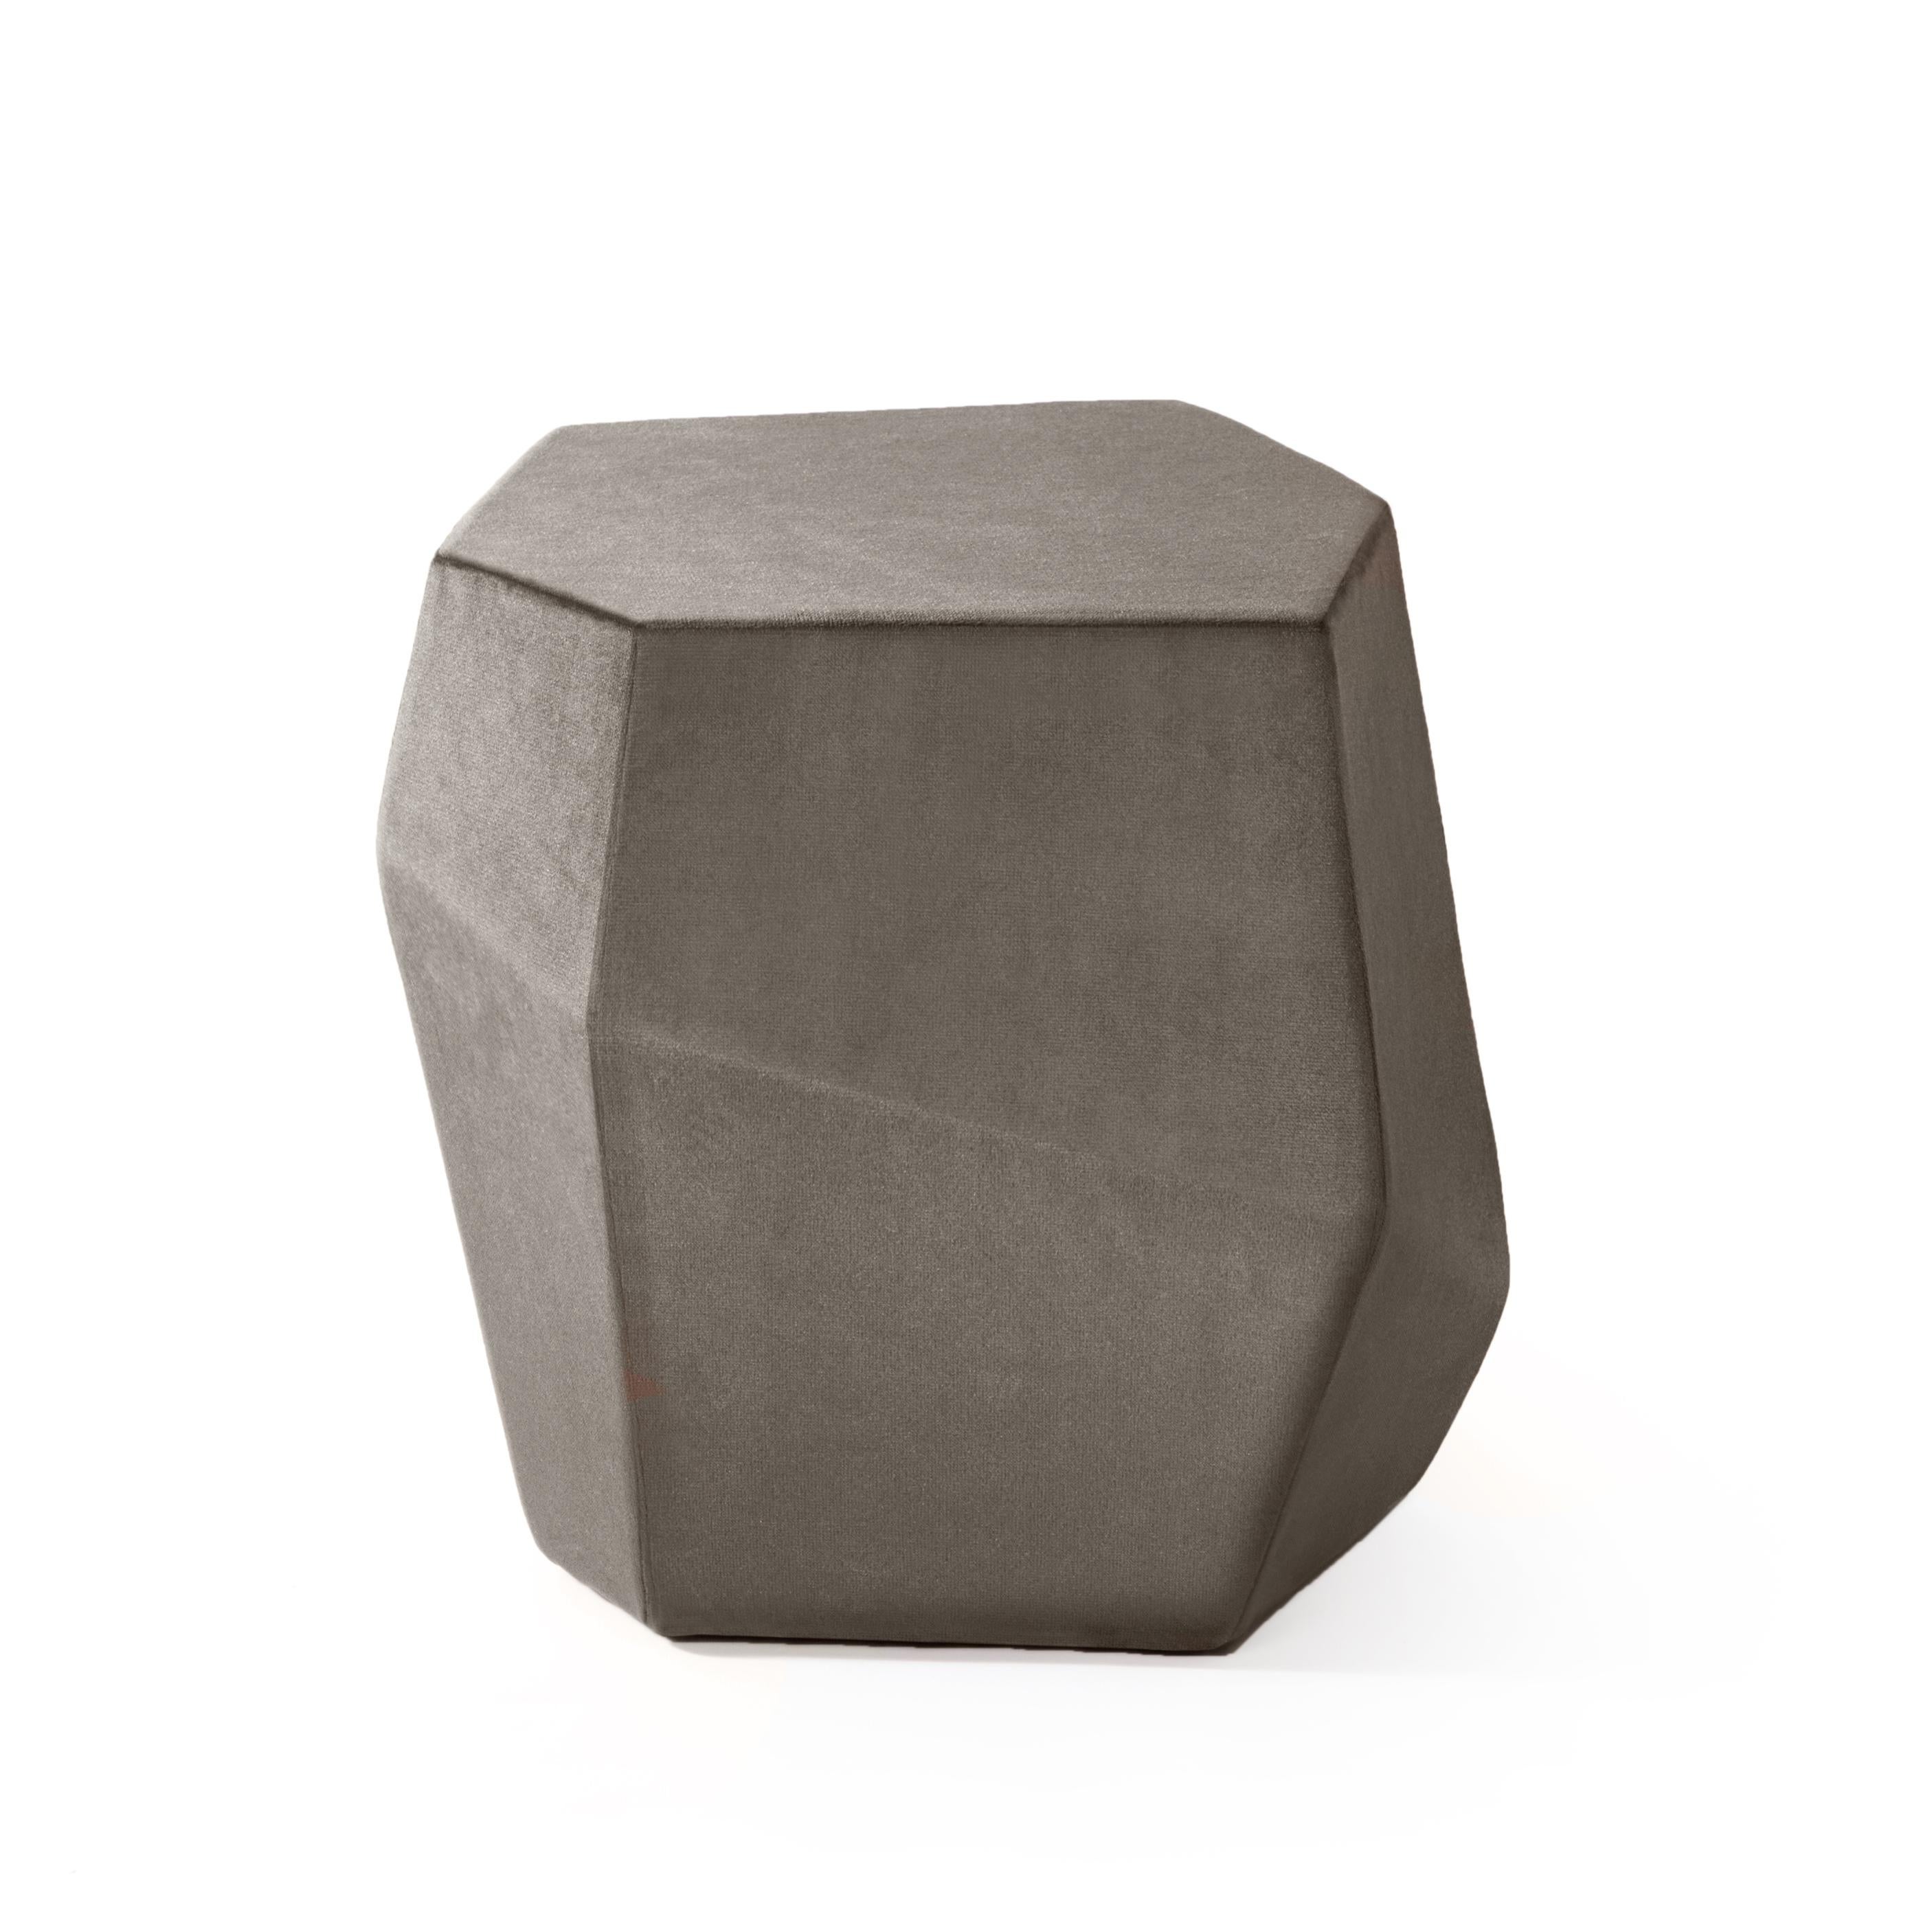 Hand-Crafted Rock Stool, COM, Insidherland by Joana Santos Barbosa For Sale